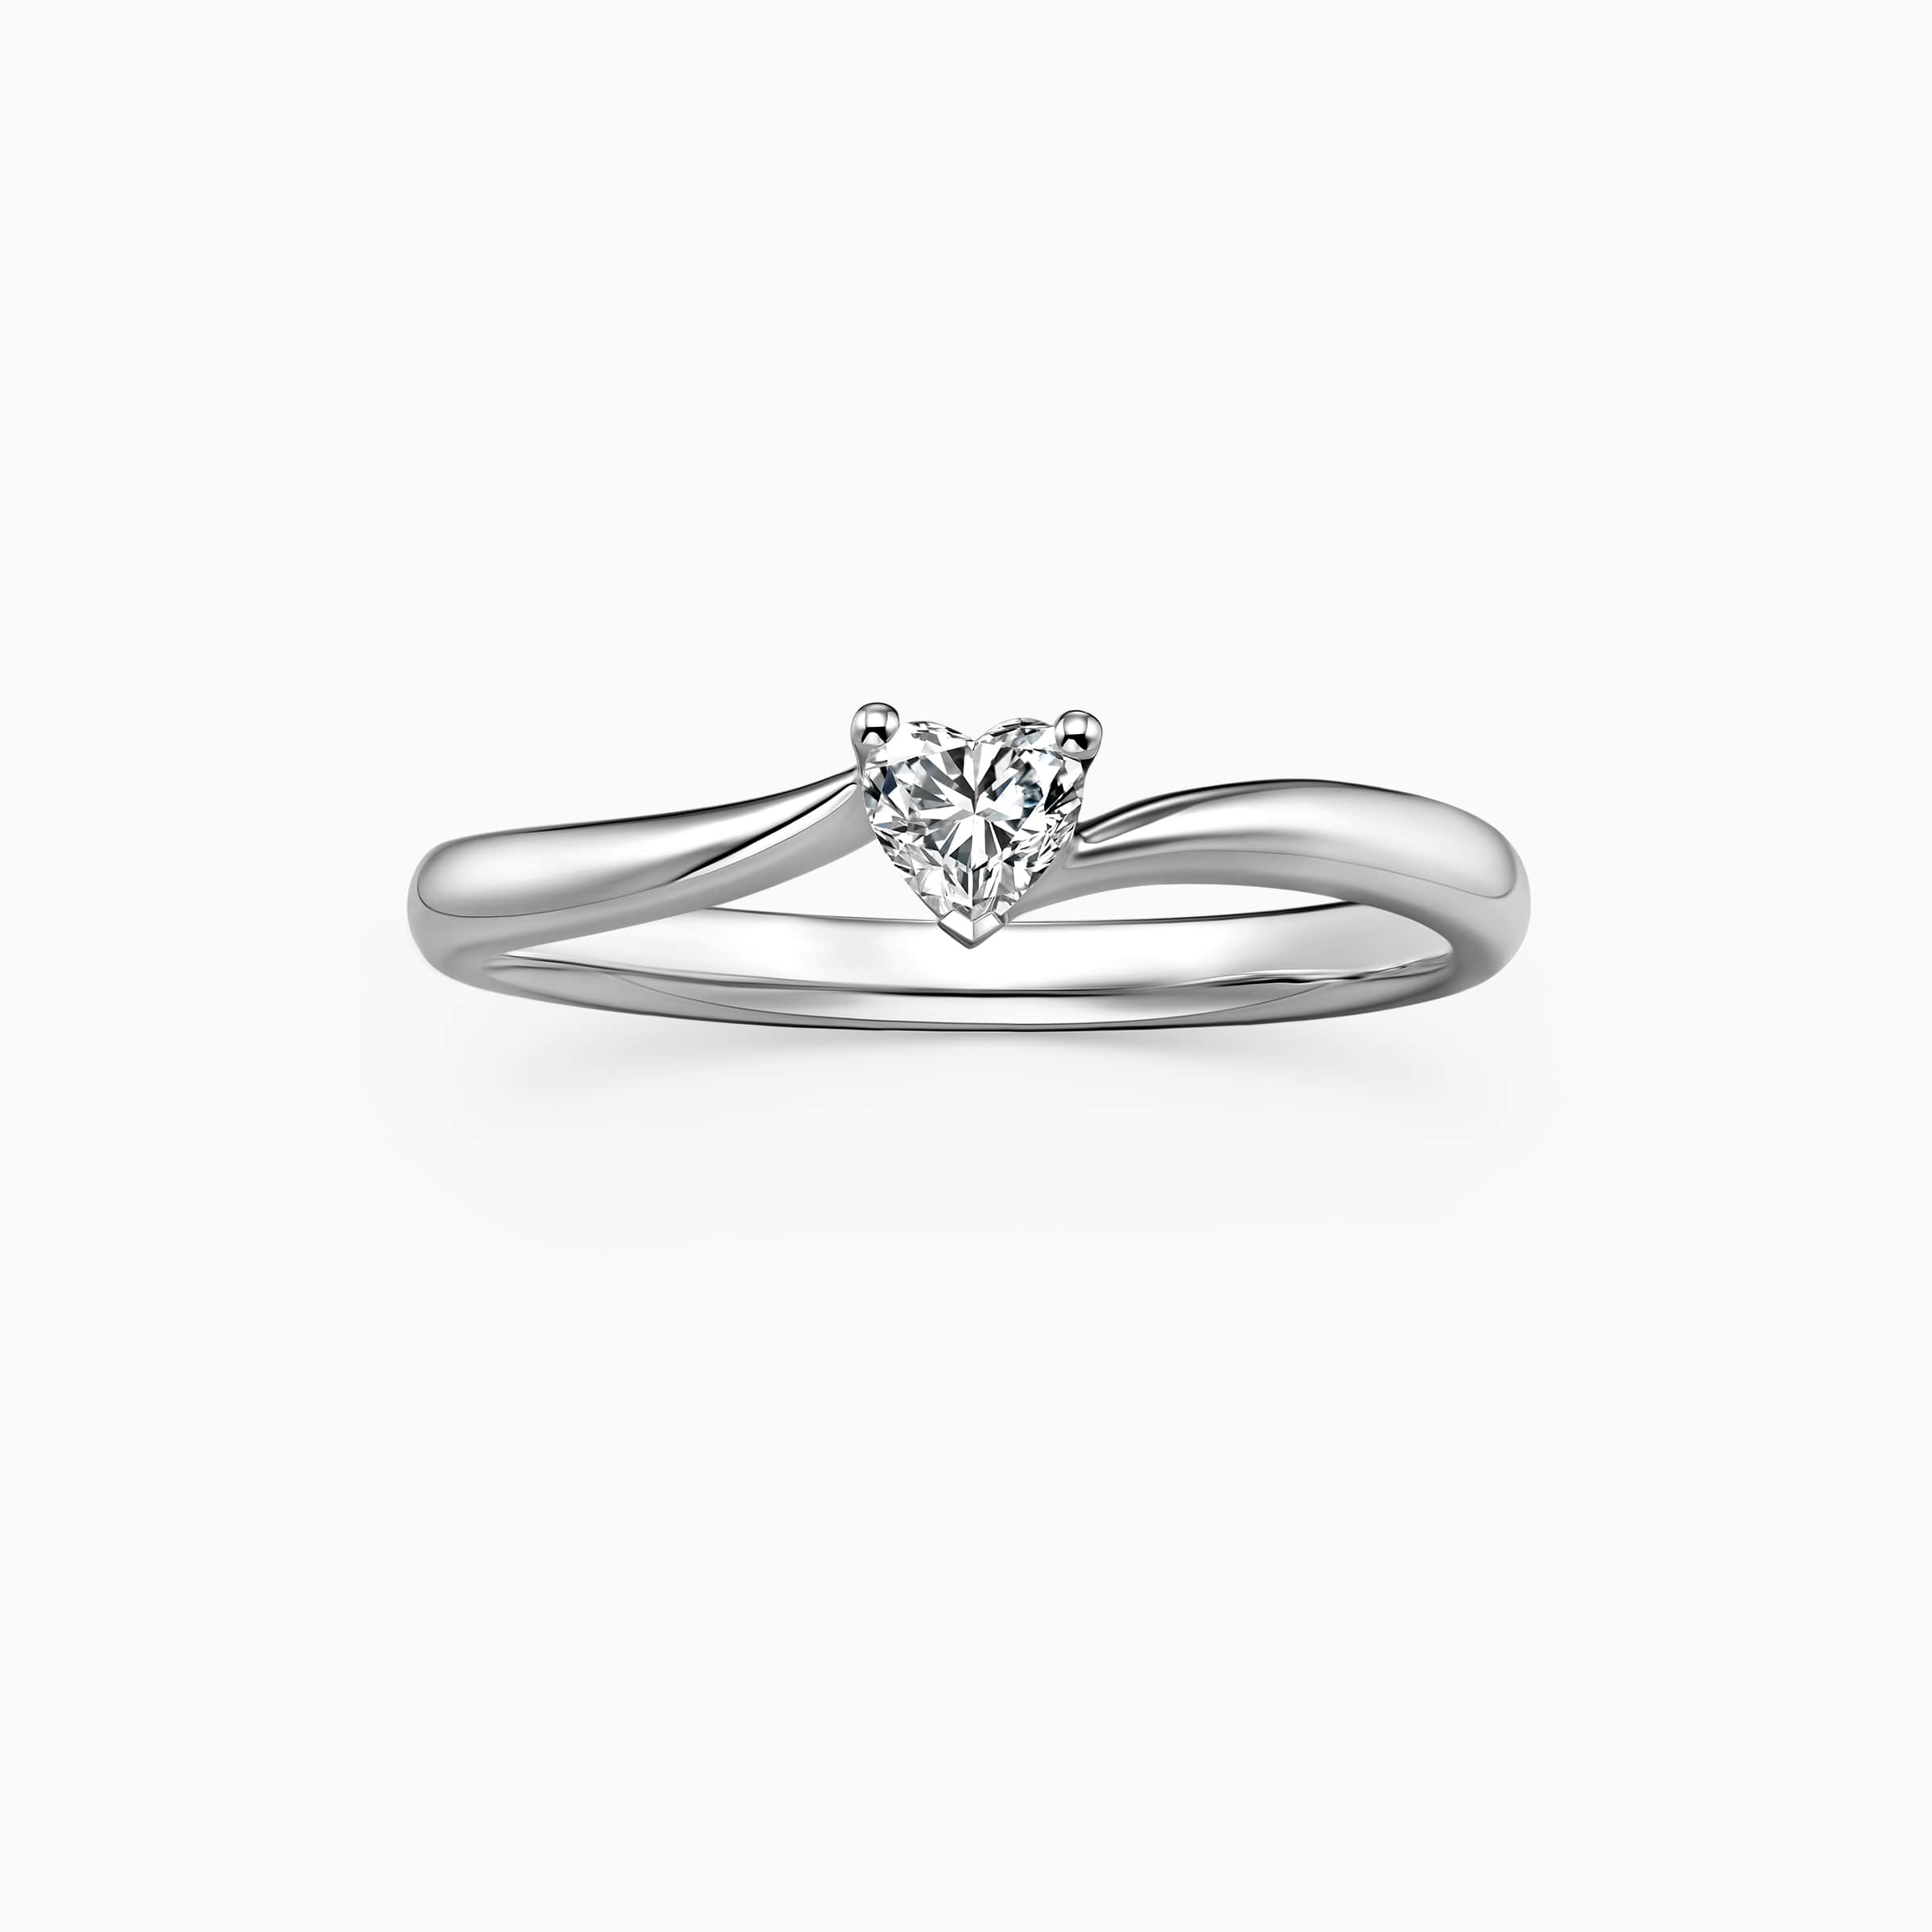 Darry Ring heart shaped solitaire engagement ring